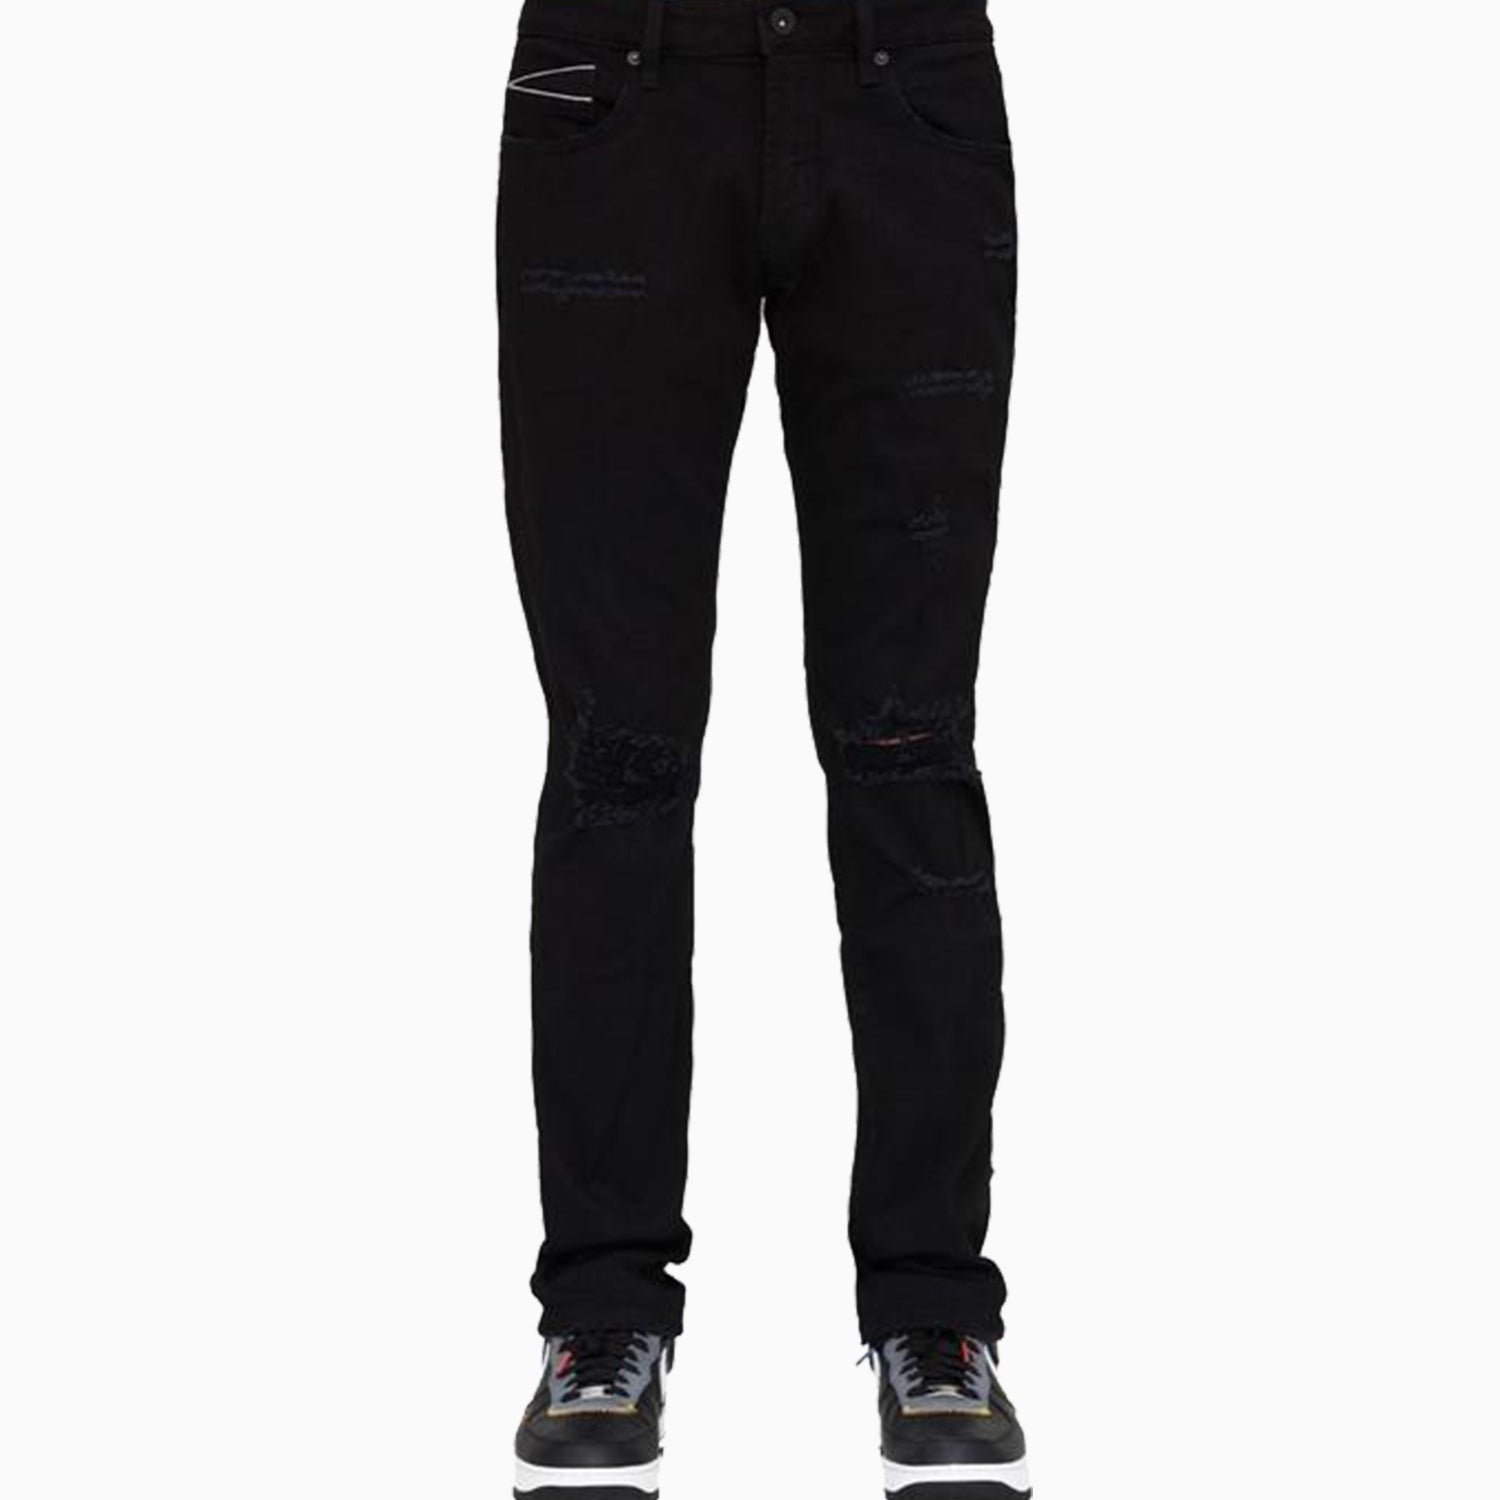 cult-of-individuality-mens-rocker-slim-pant-621a0-rs40h